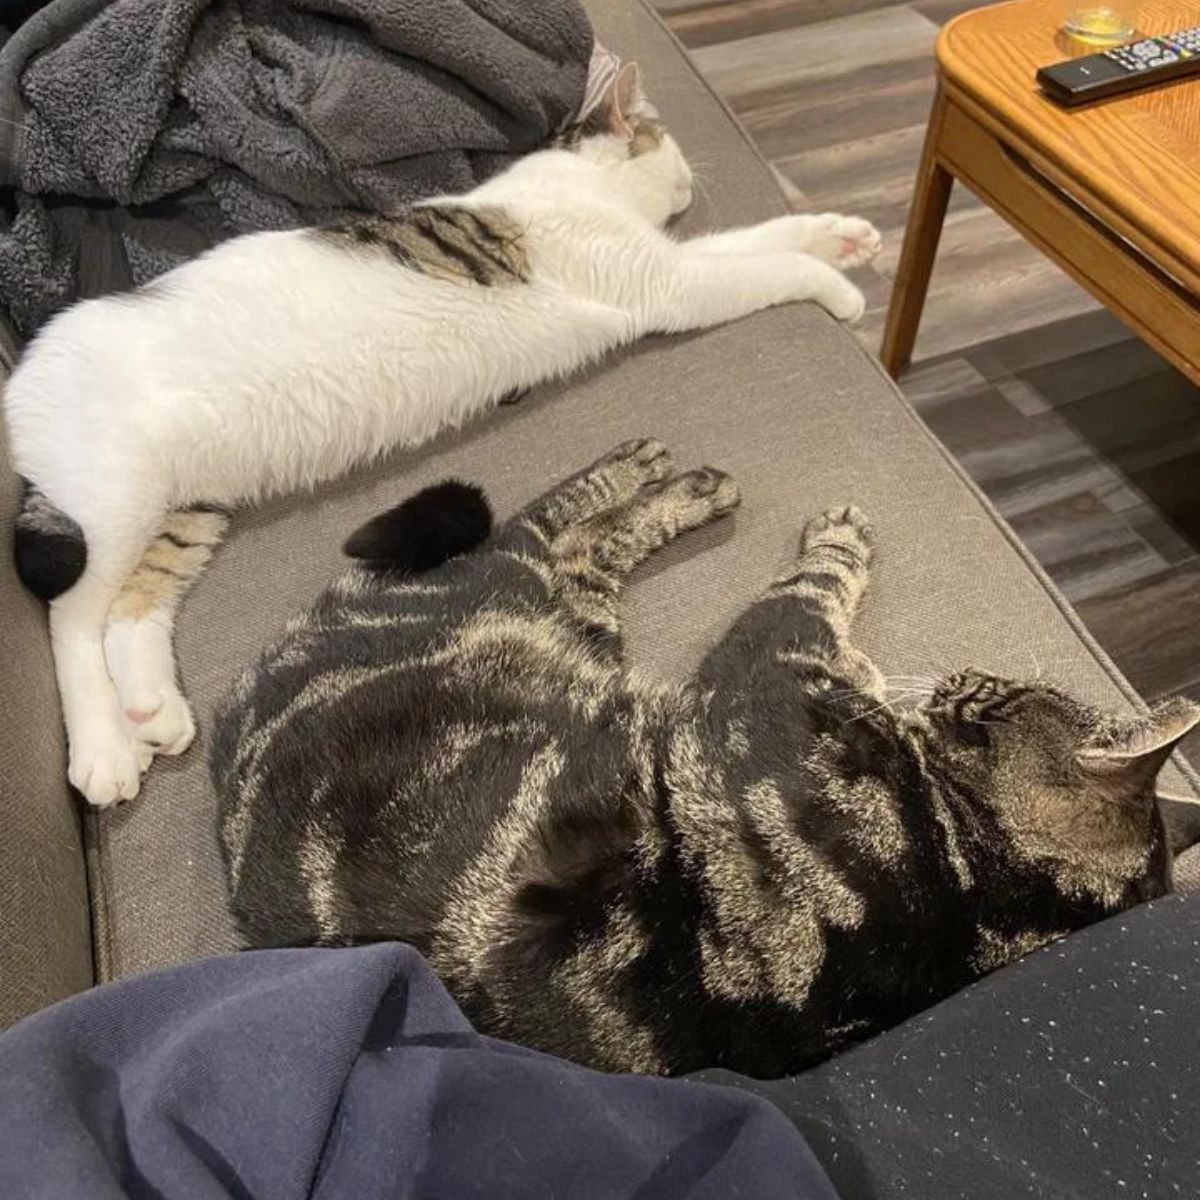 cats relaxing on the couch